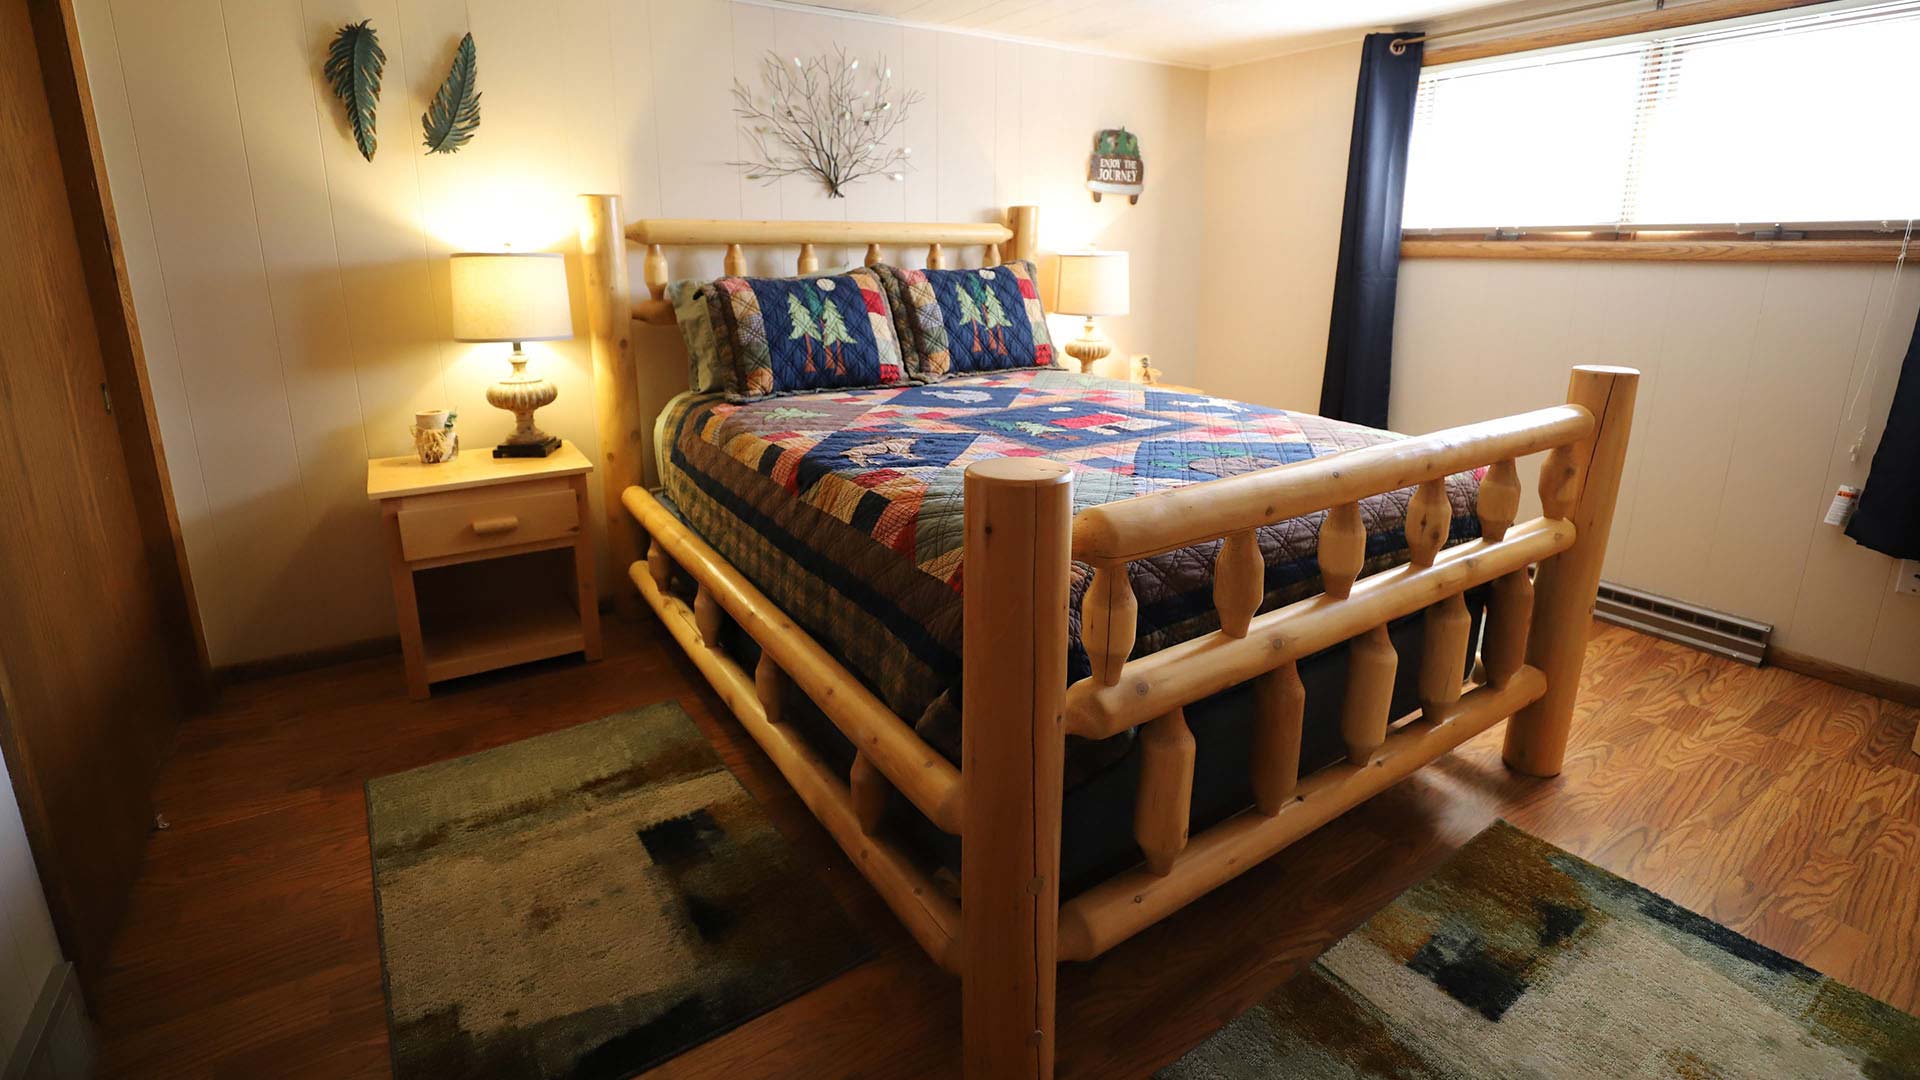 Where to stay in Oneida County | Bedroom on display at Lake Tomahawk Lodge